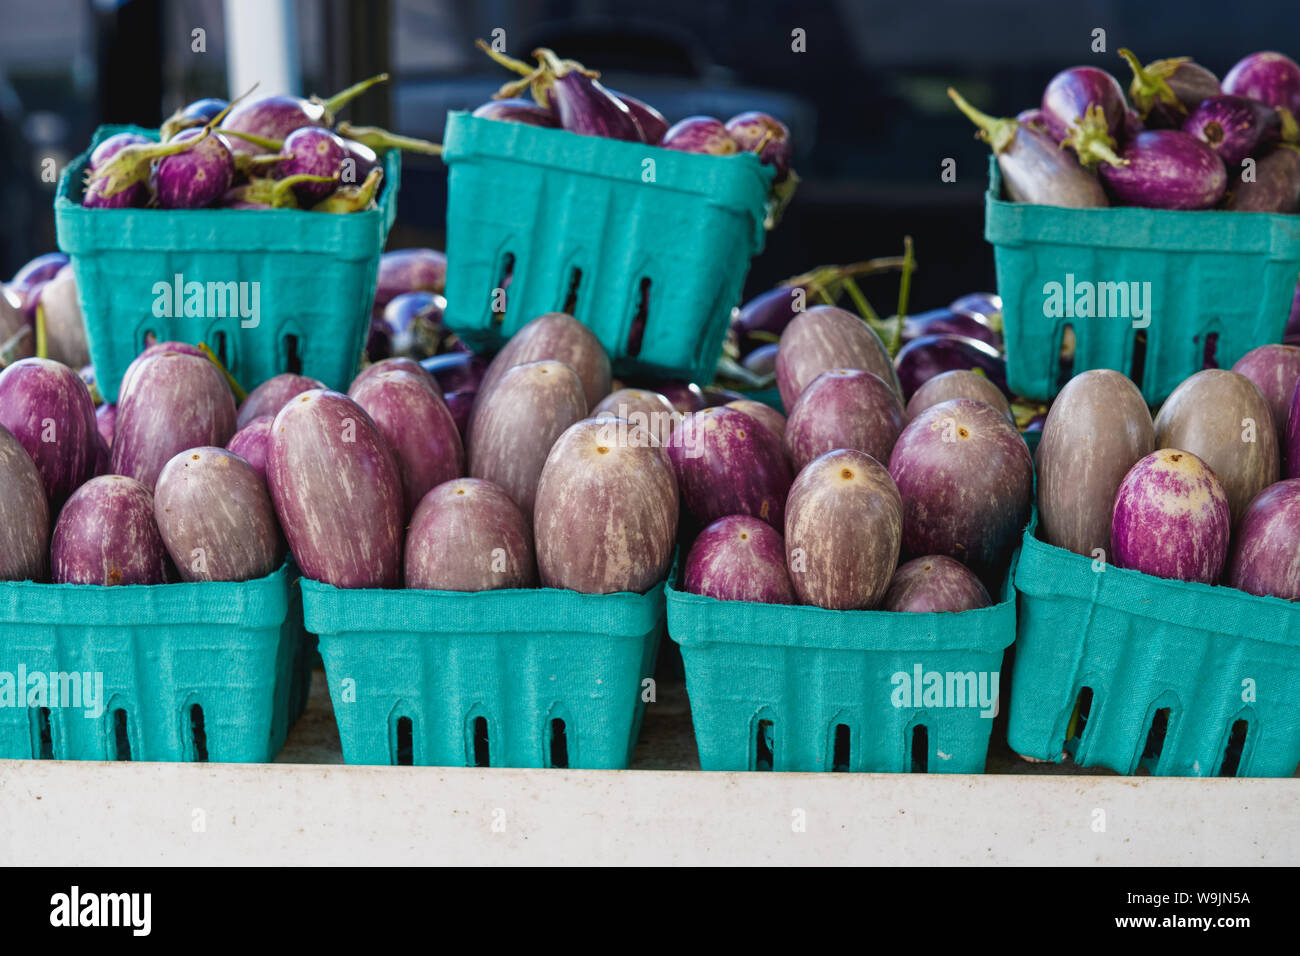 aqua green pressed fiber baskets full of light skinned purple and white small tender eggplant piled up for sale at the local farmers market Stock Photo